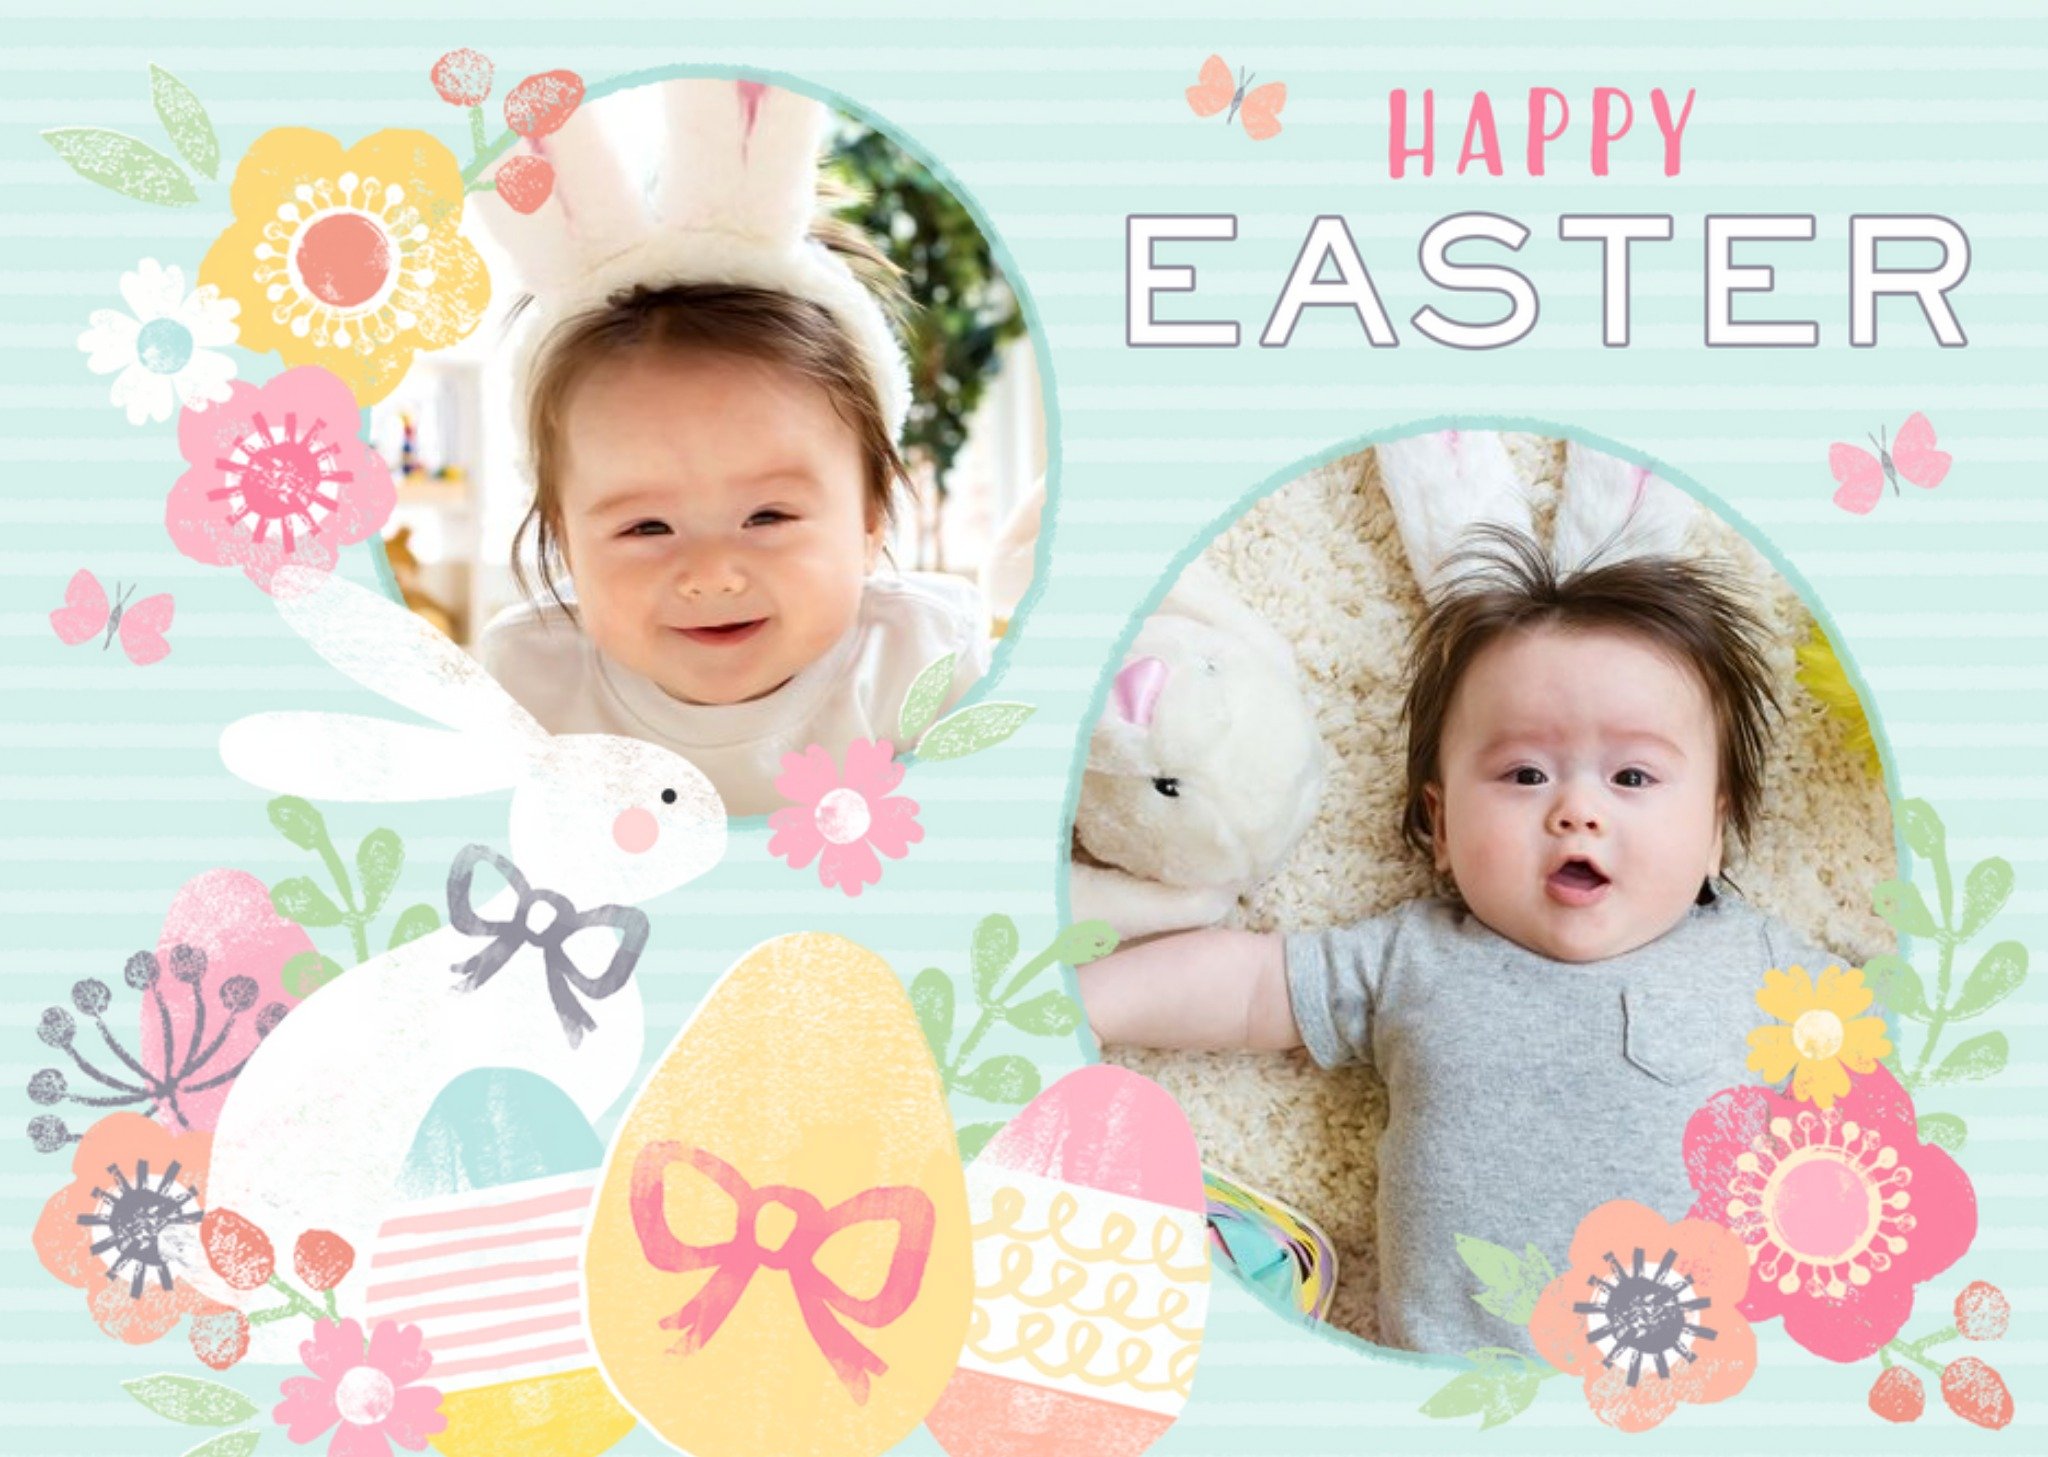 Moonpig Aqua Striped Egg And Flower Happy Easter Photo Card, Large